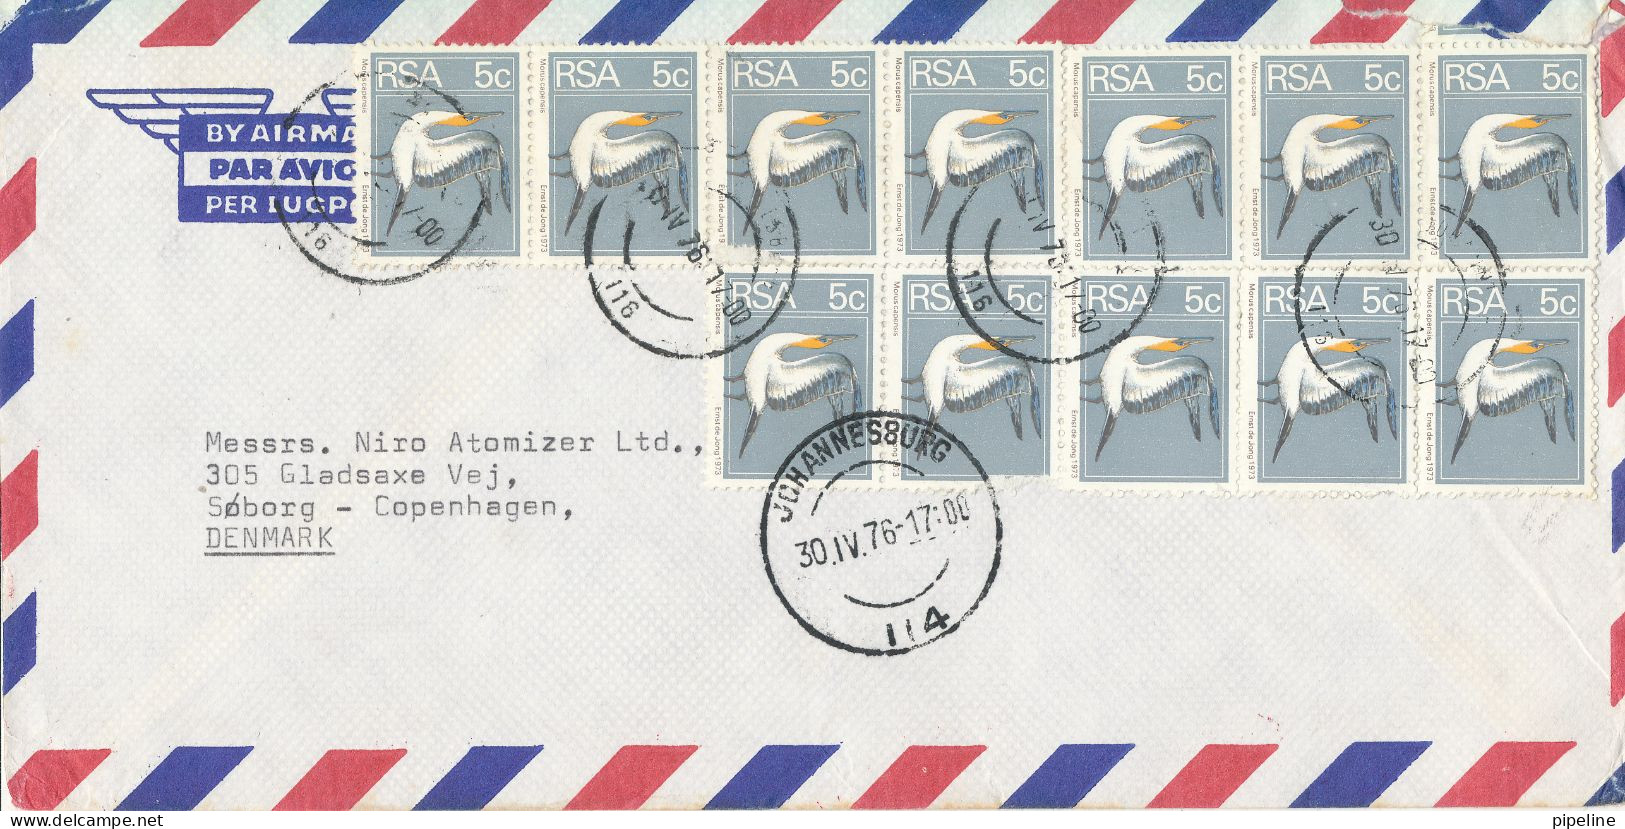 South Africa RSA Air Mail Cover Sent To Denmark 30-4-1976 With A Lot Of BIRD Stamps - Luftpost